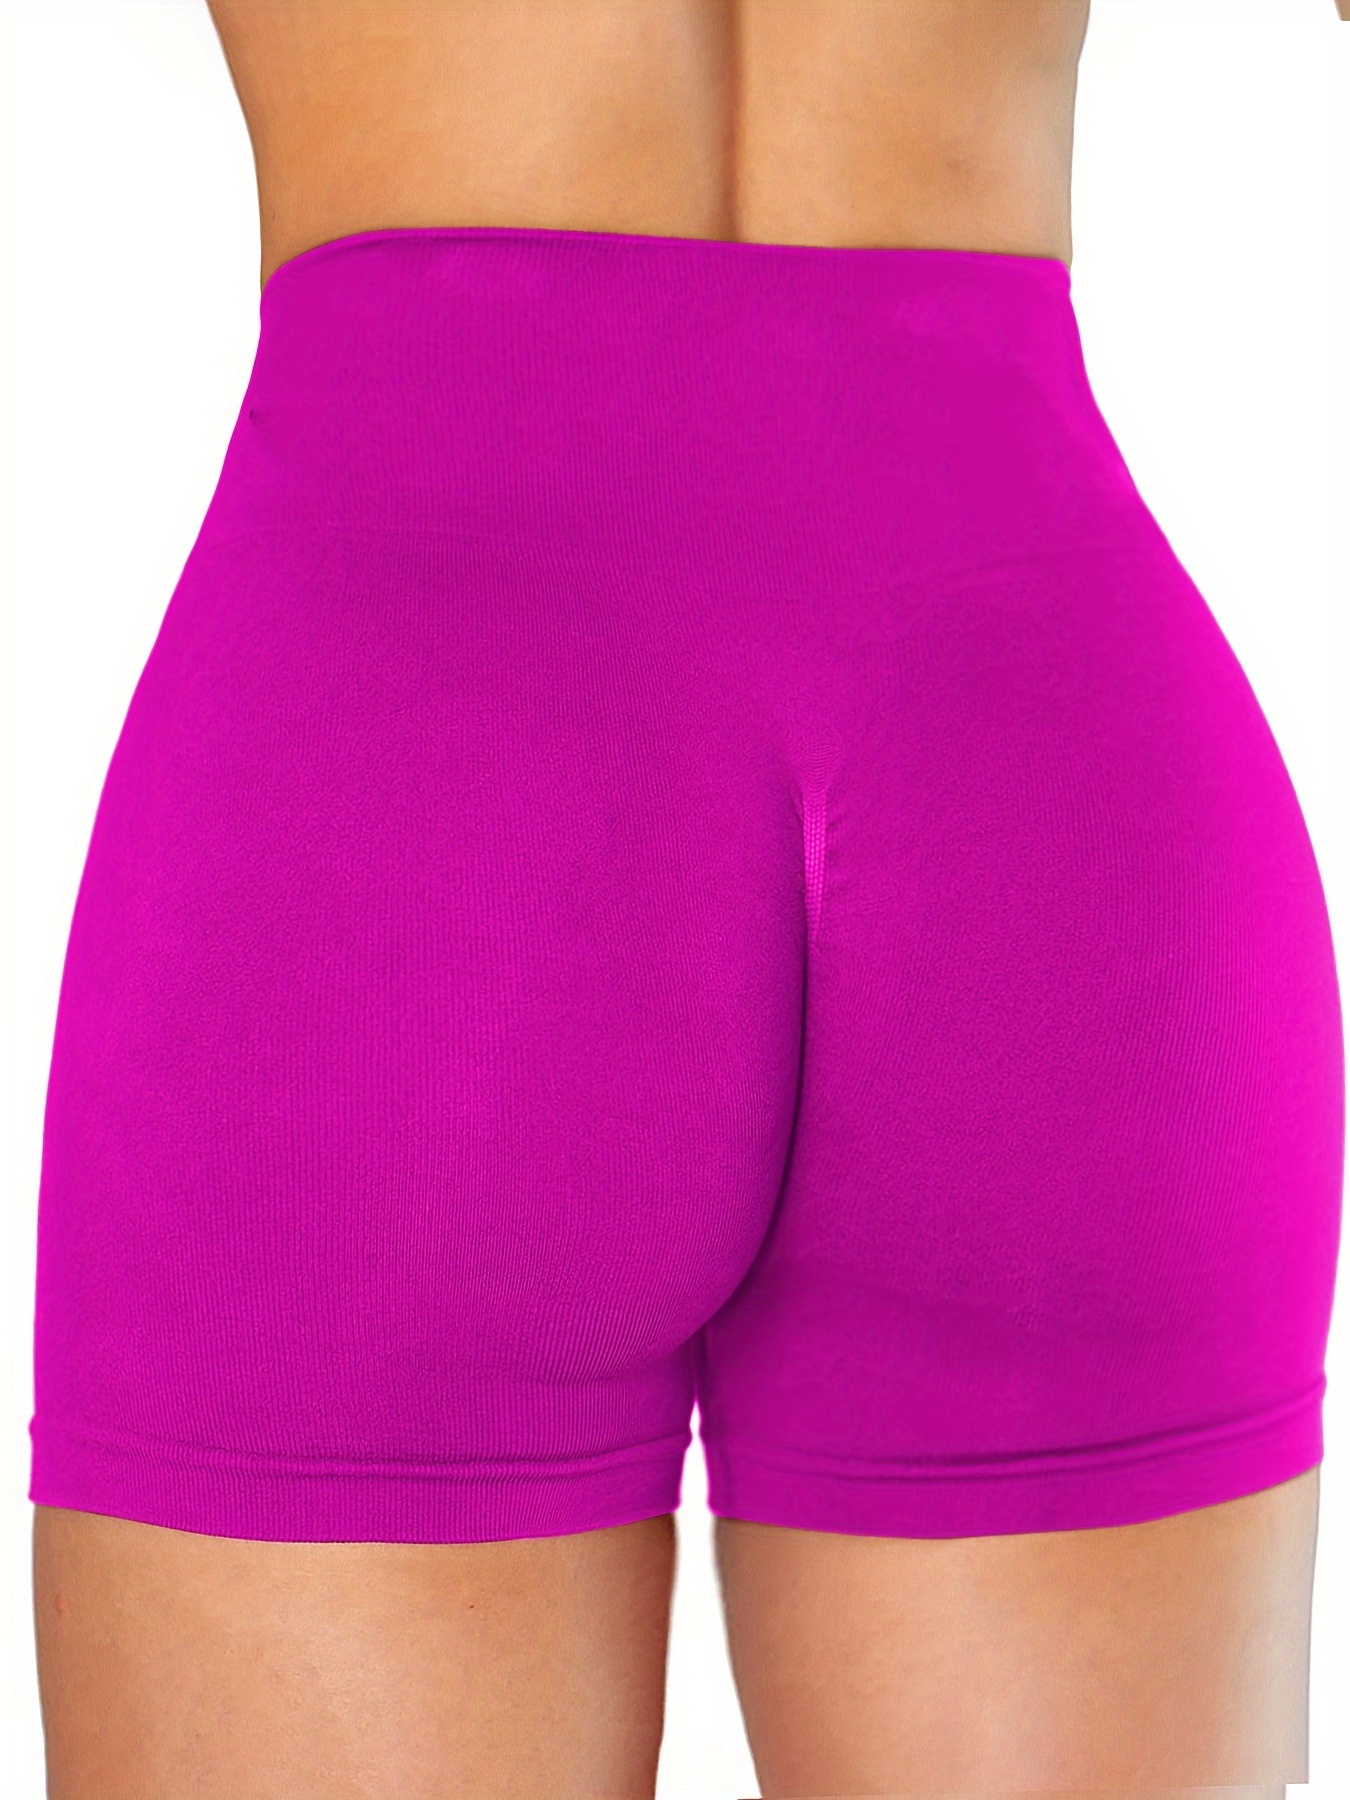 solid color quick drying yoga workout shorts high stretch sports running shorts womens activewear details 35